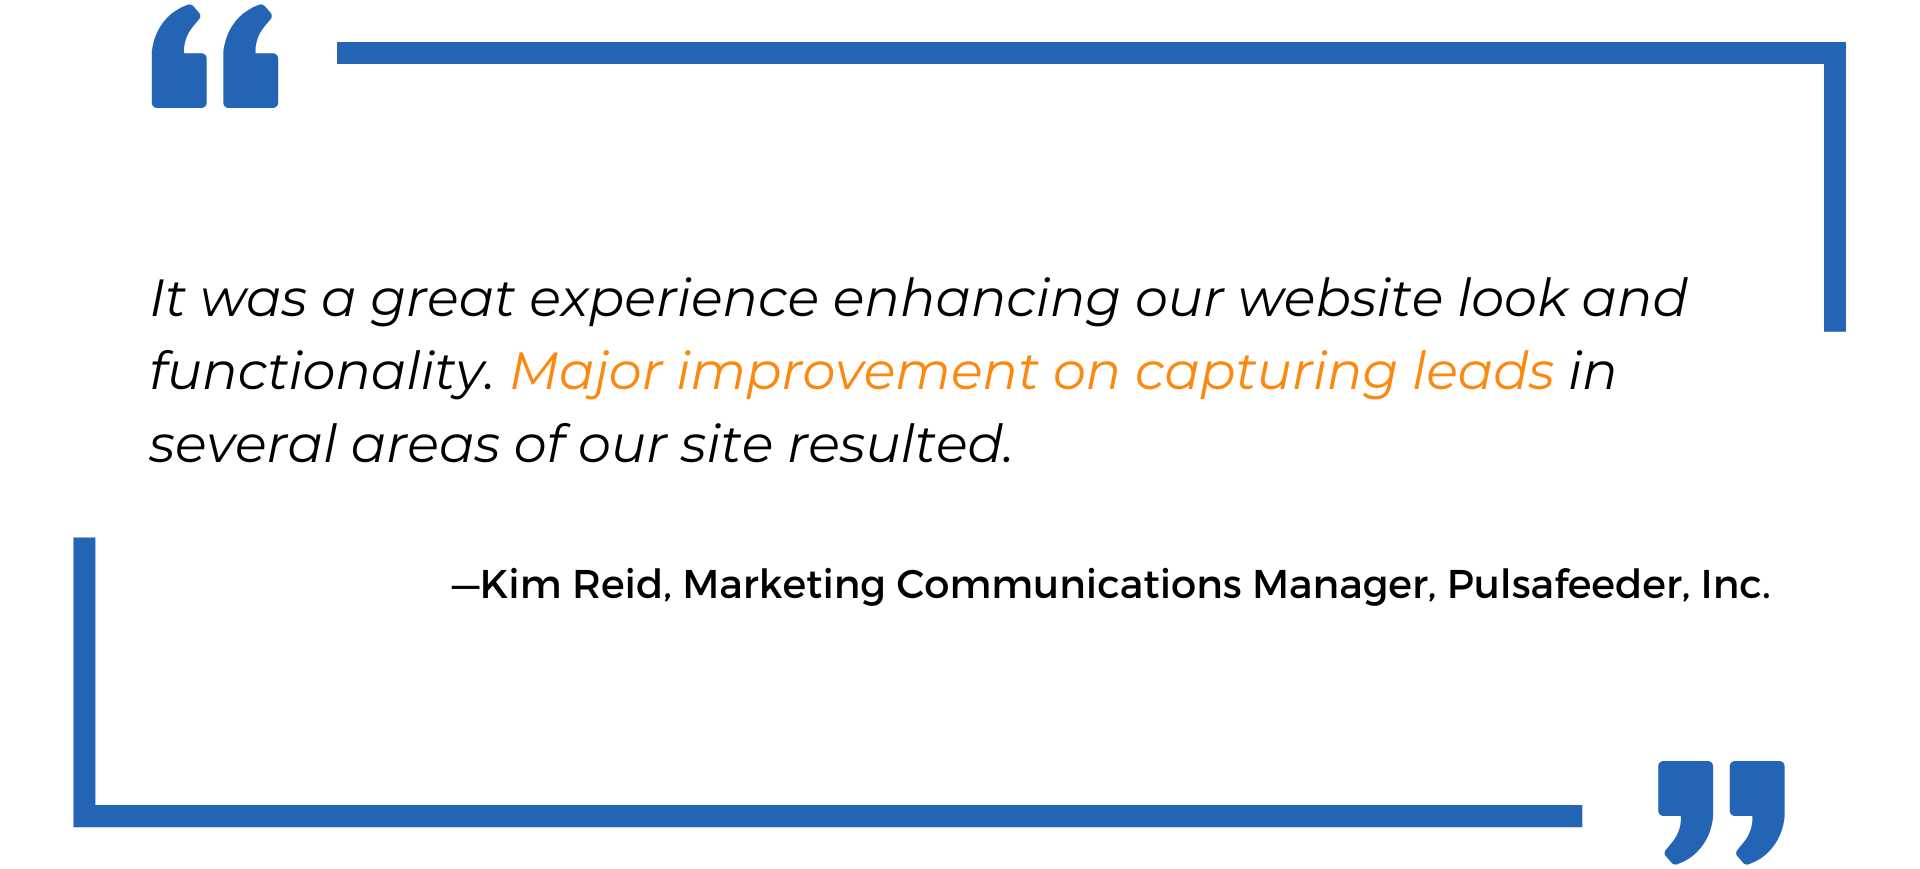 Major improvement on capturing leads in several areas of our site resulted. - Pulsafeeder, Inc.